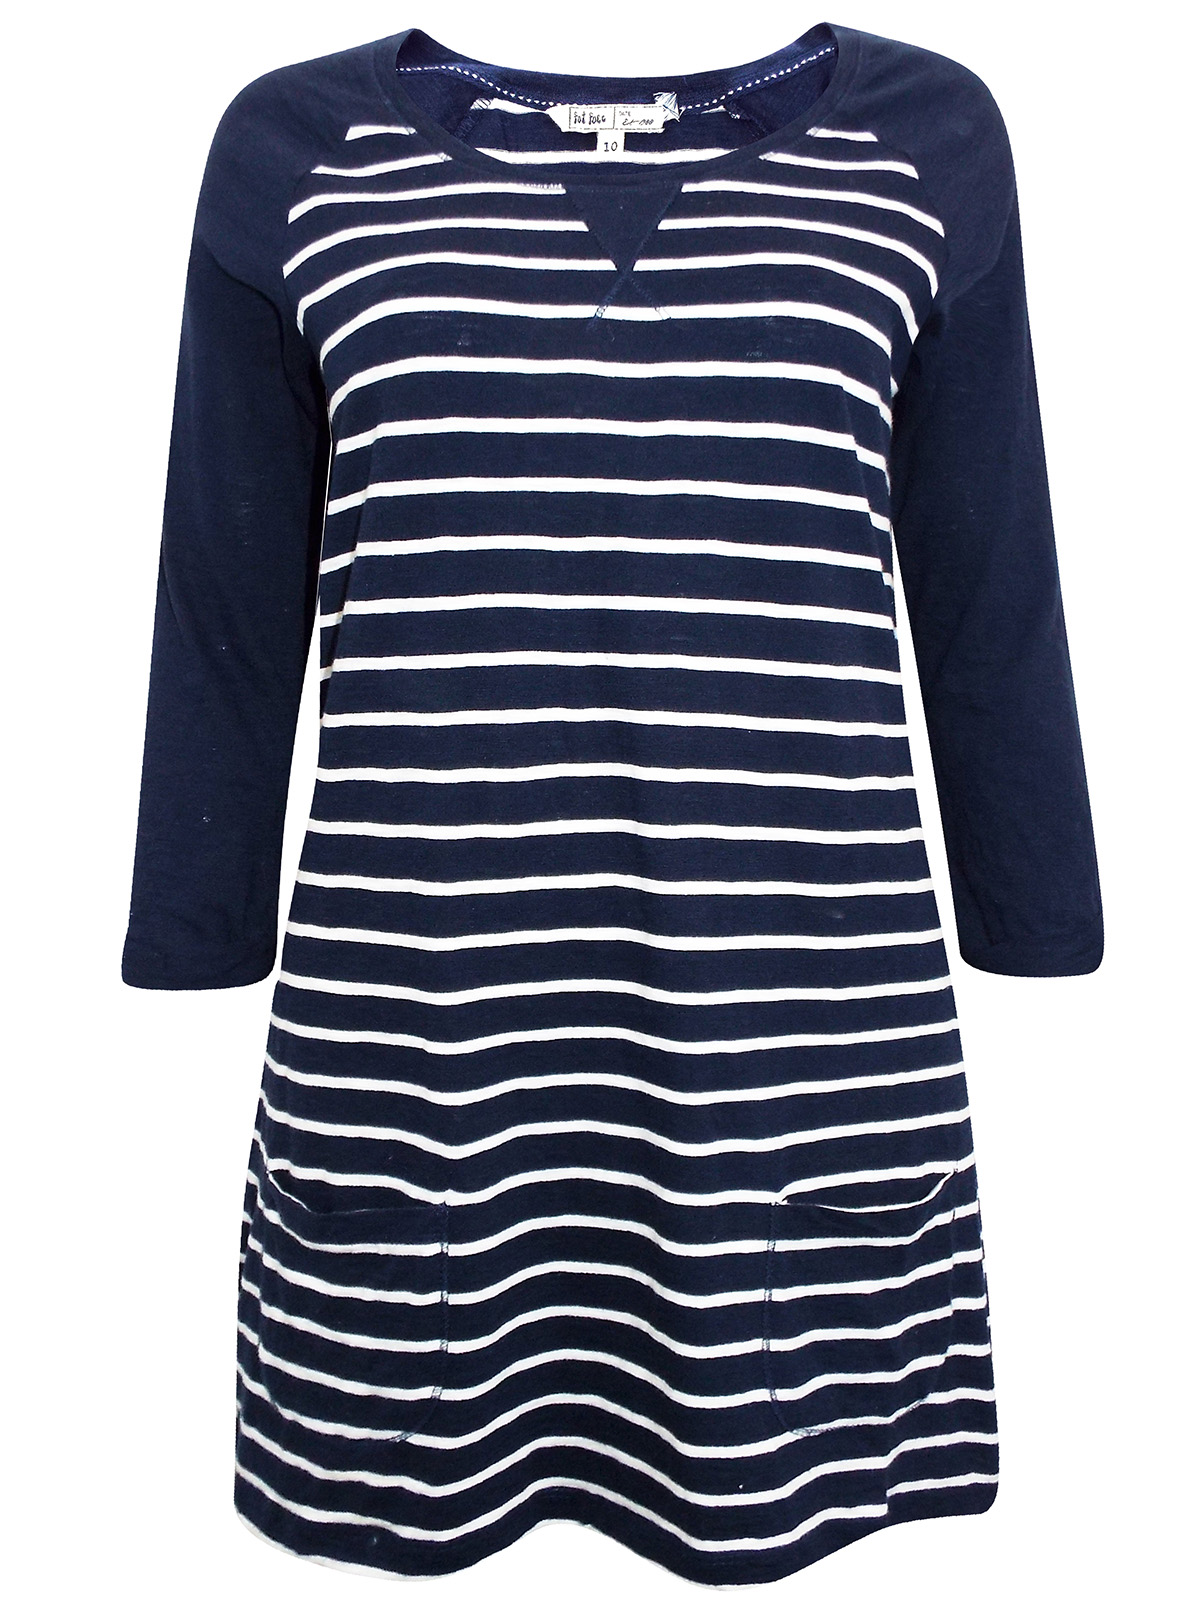 FAT FACE - - Fat Face NAVY Pure Cotton Striped Pocket Tunic Top - Size ...